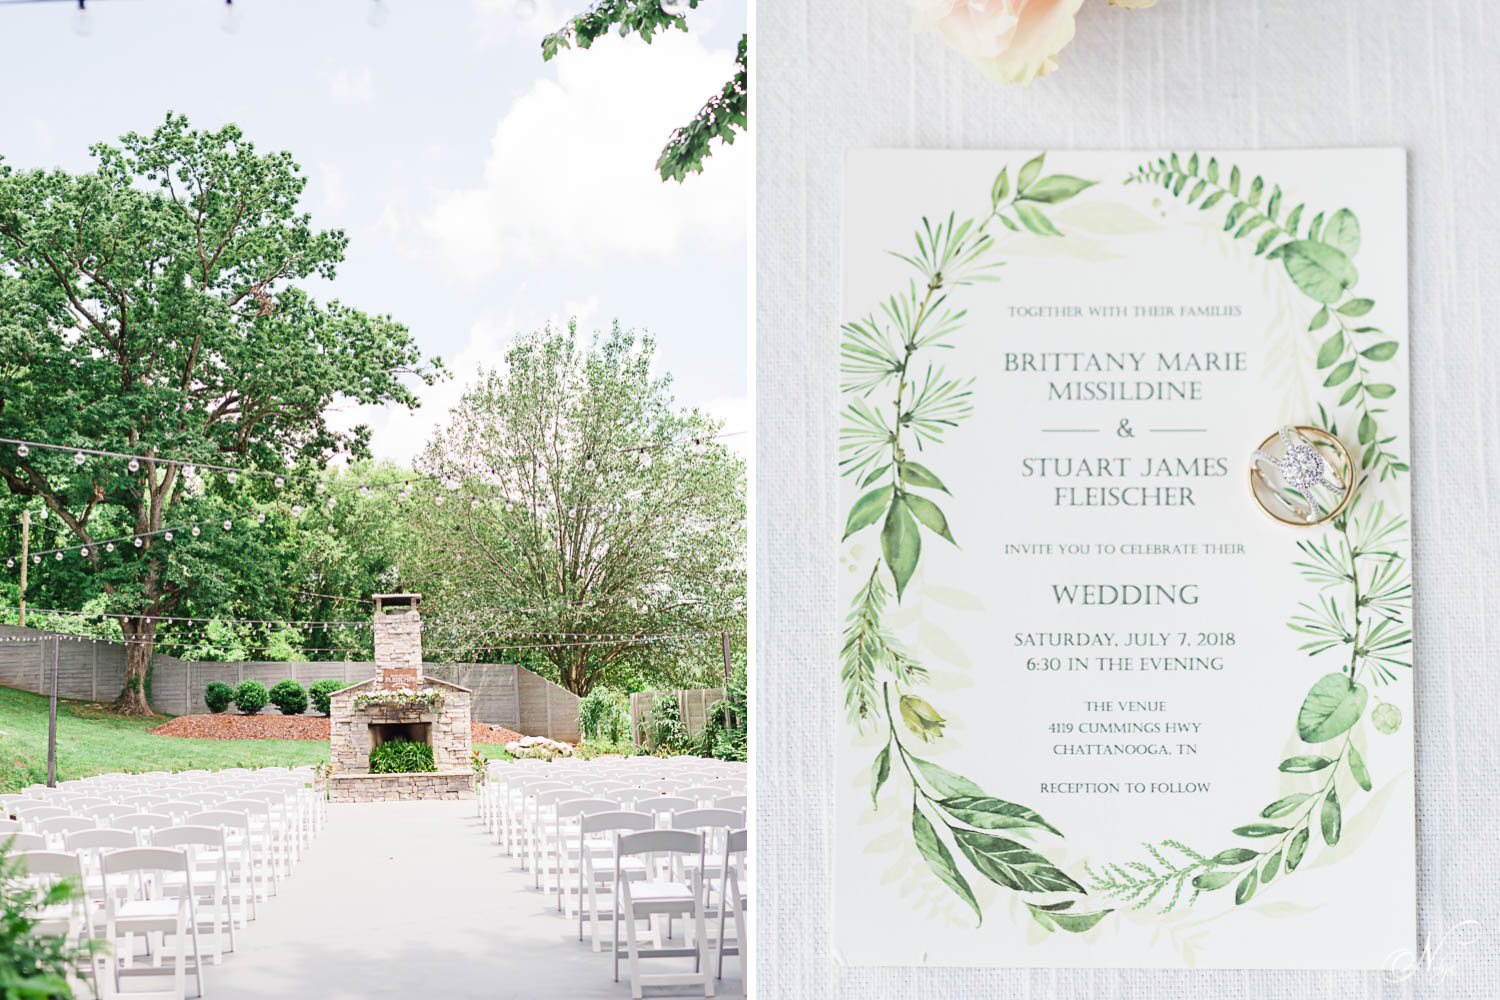 the Venue Chattanooga's outdoor wedding ceremony area. And a green and white invitation